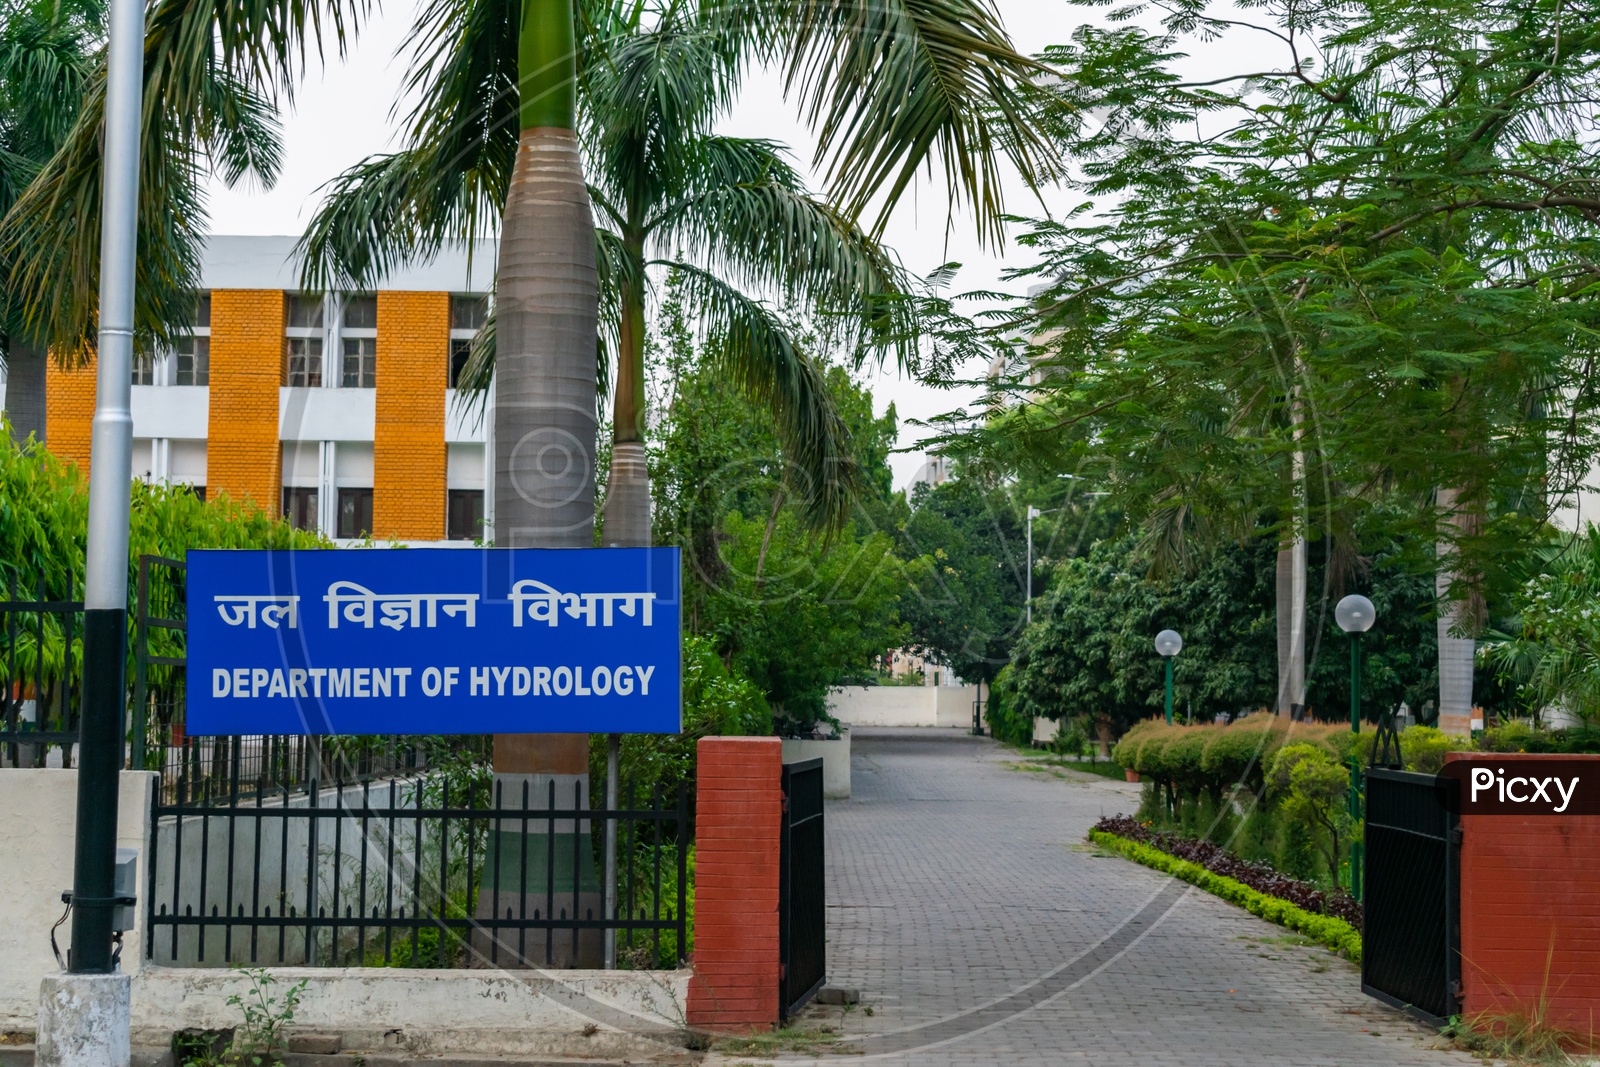 Department of Hydrology, Indian Institute of Technology Roorkee (IIT Roorkee)